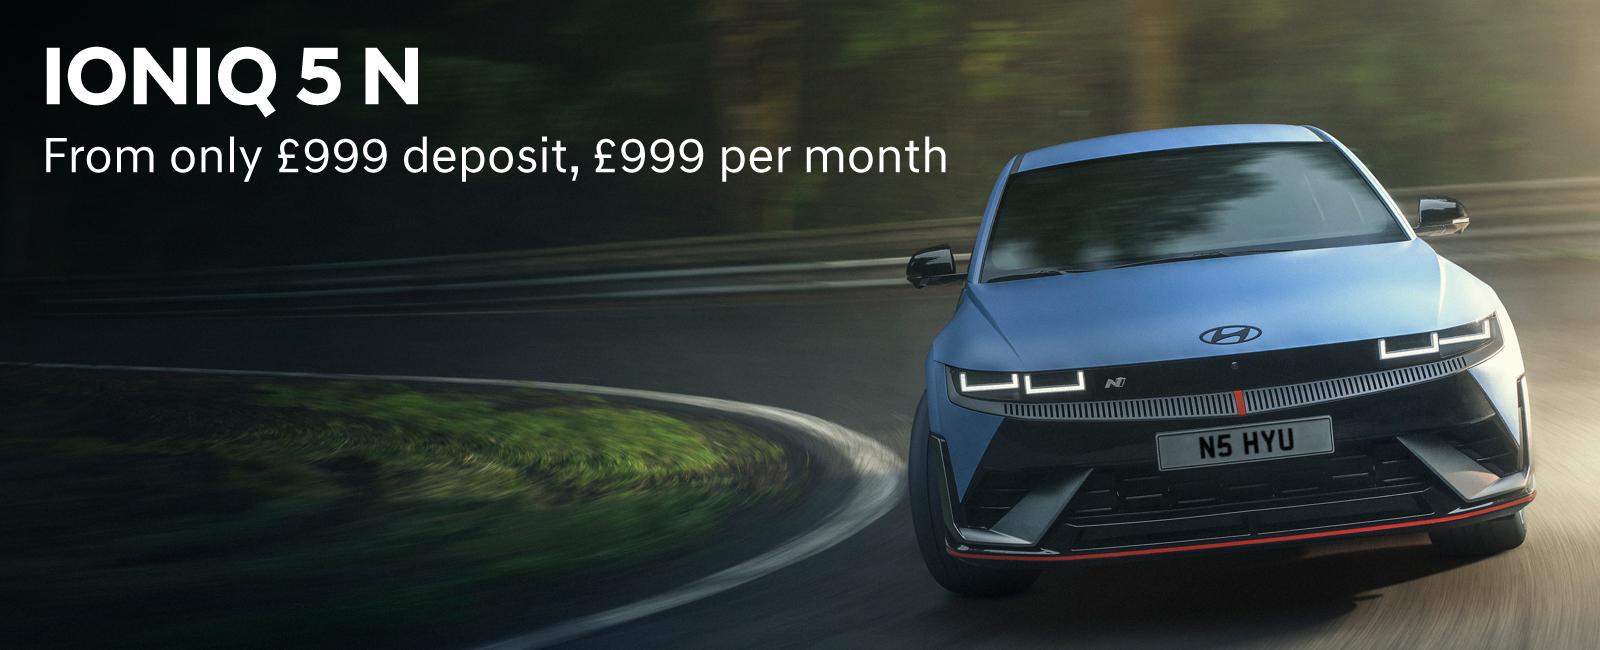 The IONIQ 5 N from only £999 deposit, £999 per month